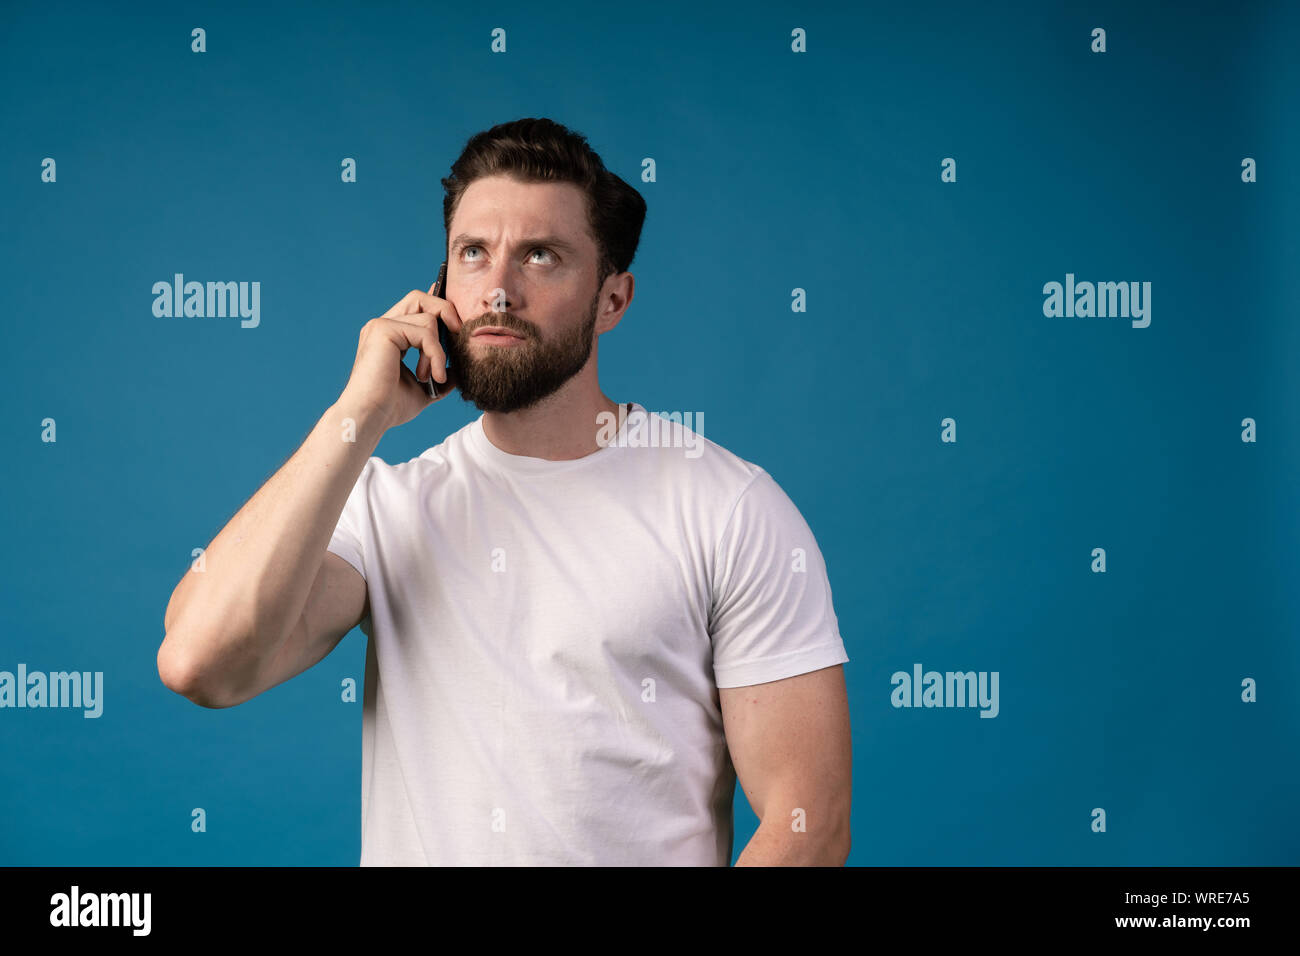 Portrait Of Worried Young Man On The Phone. Pull his eyes up. Feel kinda dissatisfied. Stock Photo